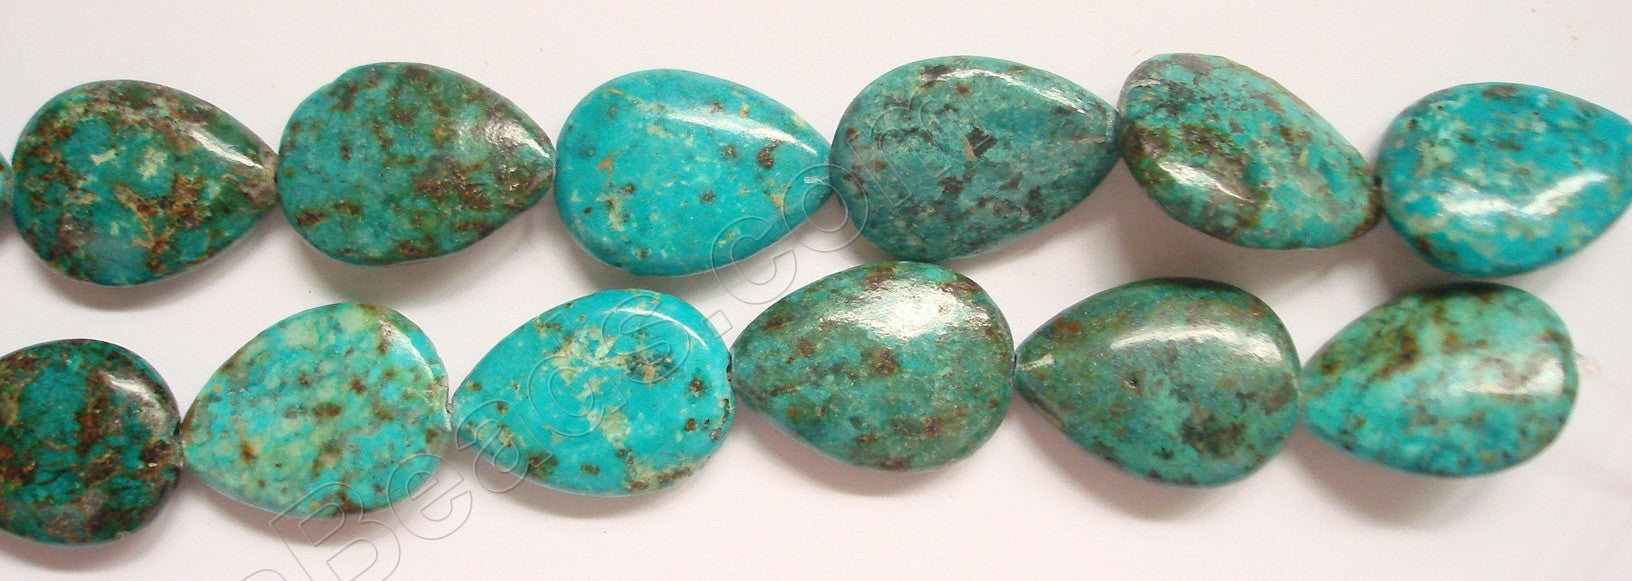 Africa Turquoise - 25x35mm Puff Drops  16"